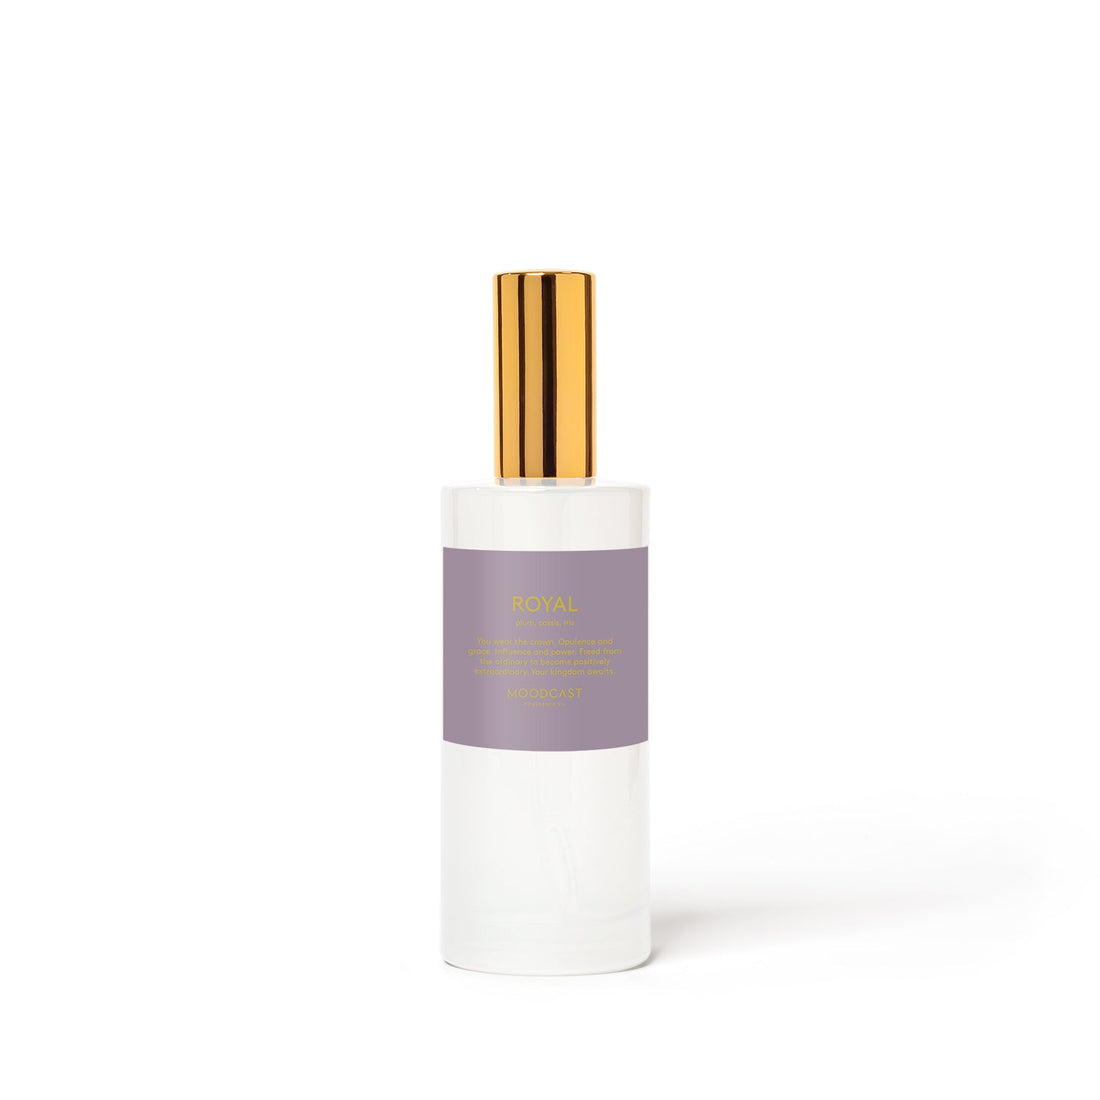 Royal - Persona Collection (White & Gold) - 3.4fl oz/100ml Glass Room & Linen Spray - Key Notes: Plum, Cassis, Iris